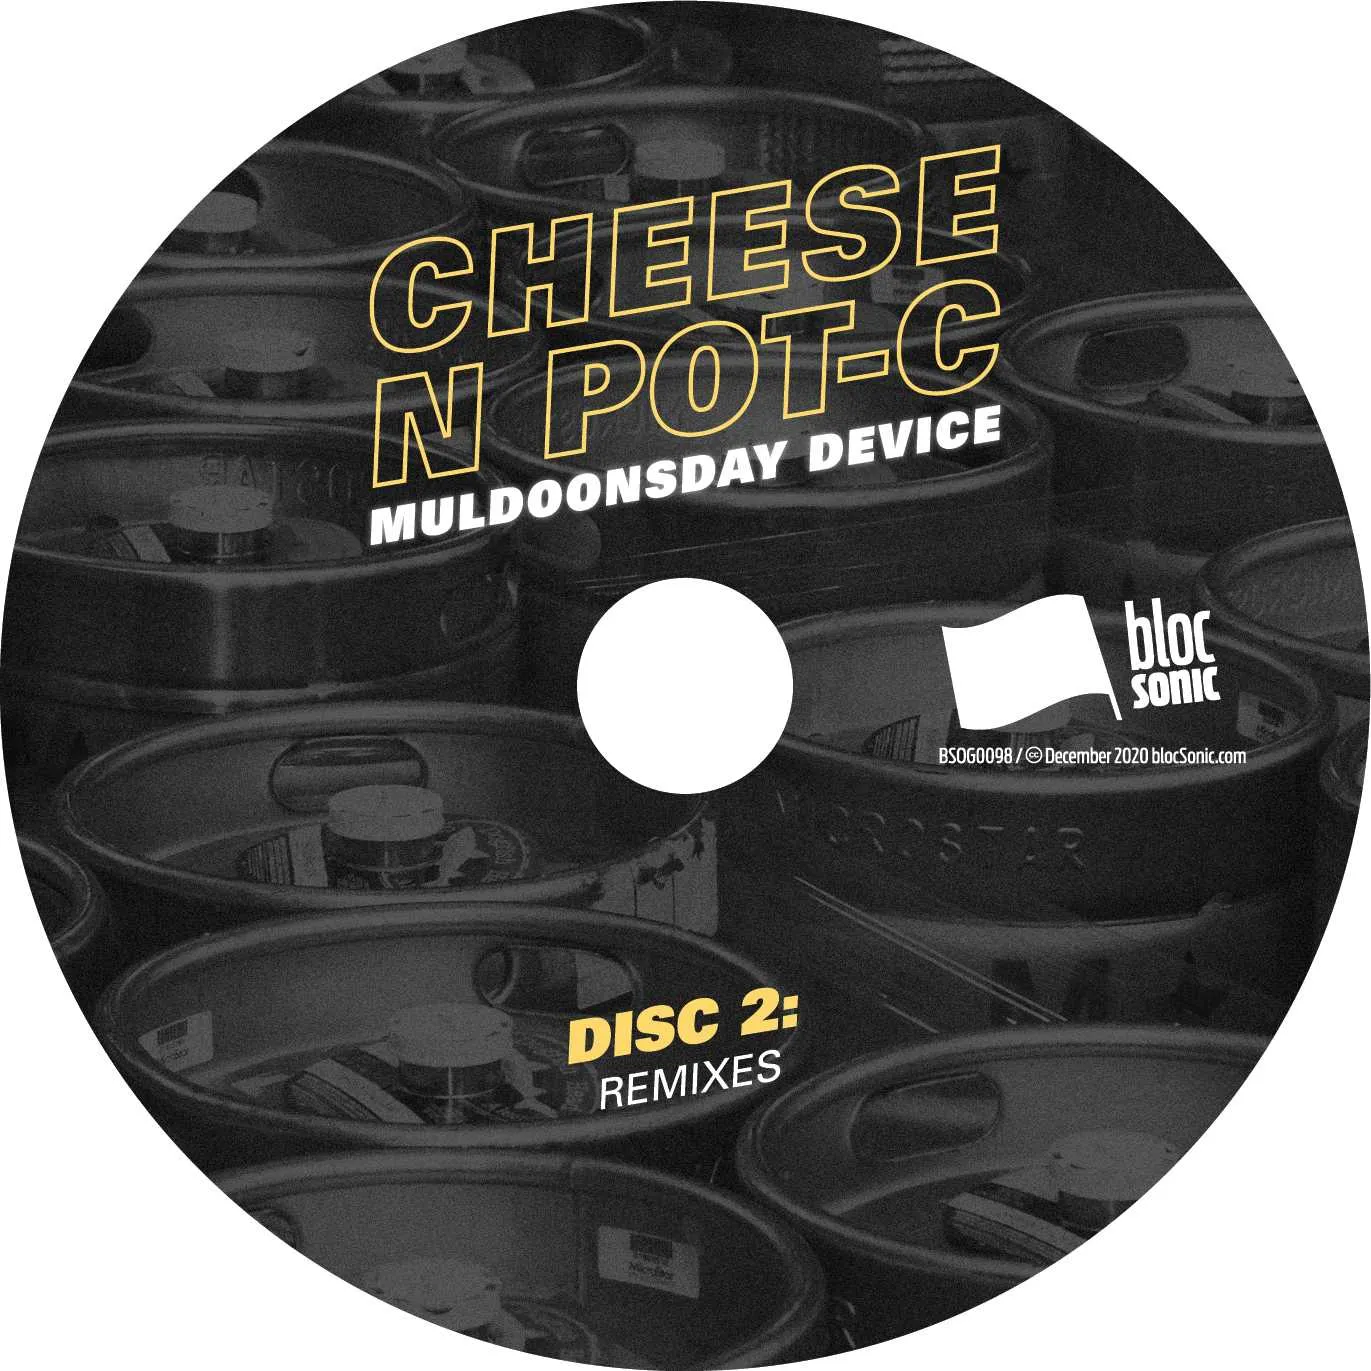 Album disc for “Muldoonsday Device” by Cheese N Pot-C